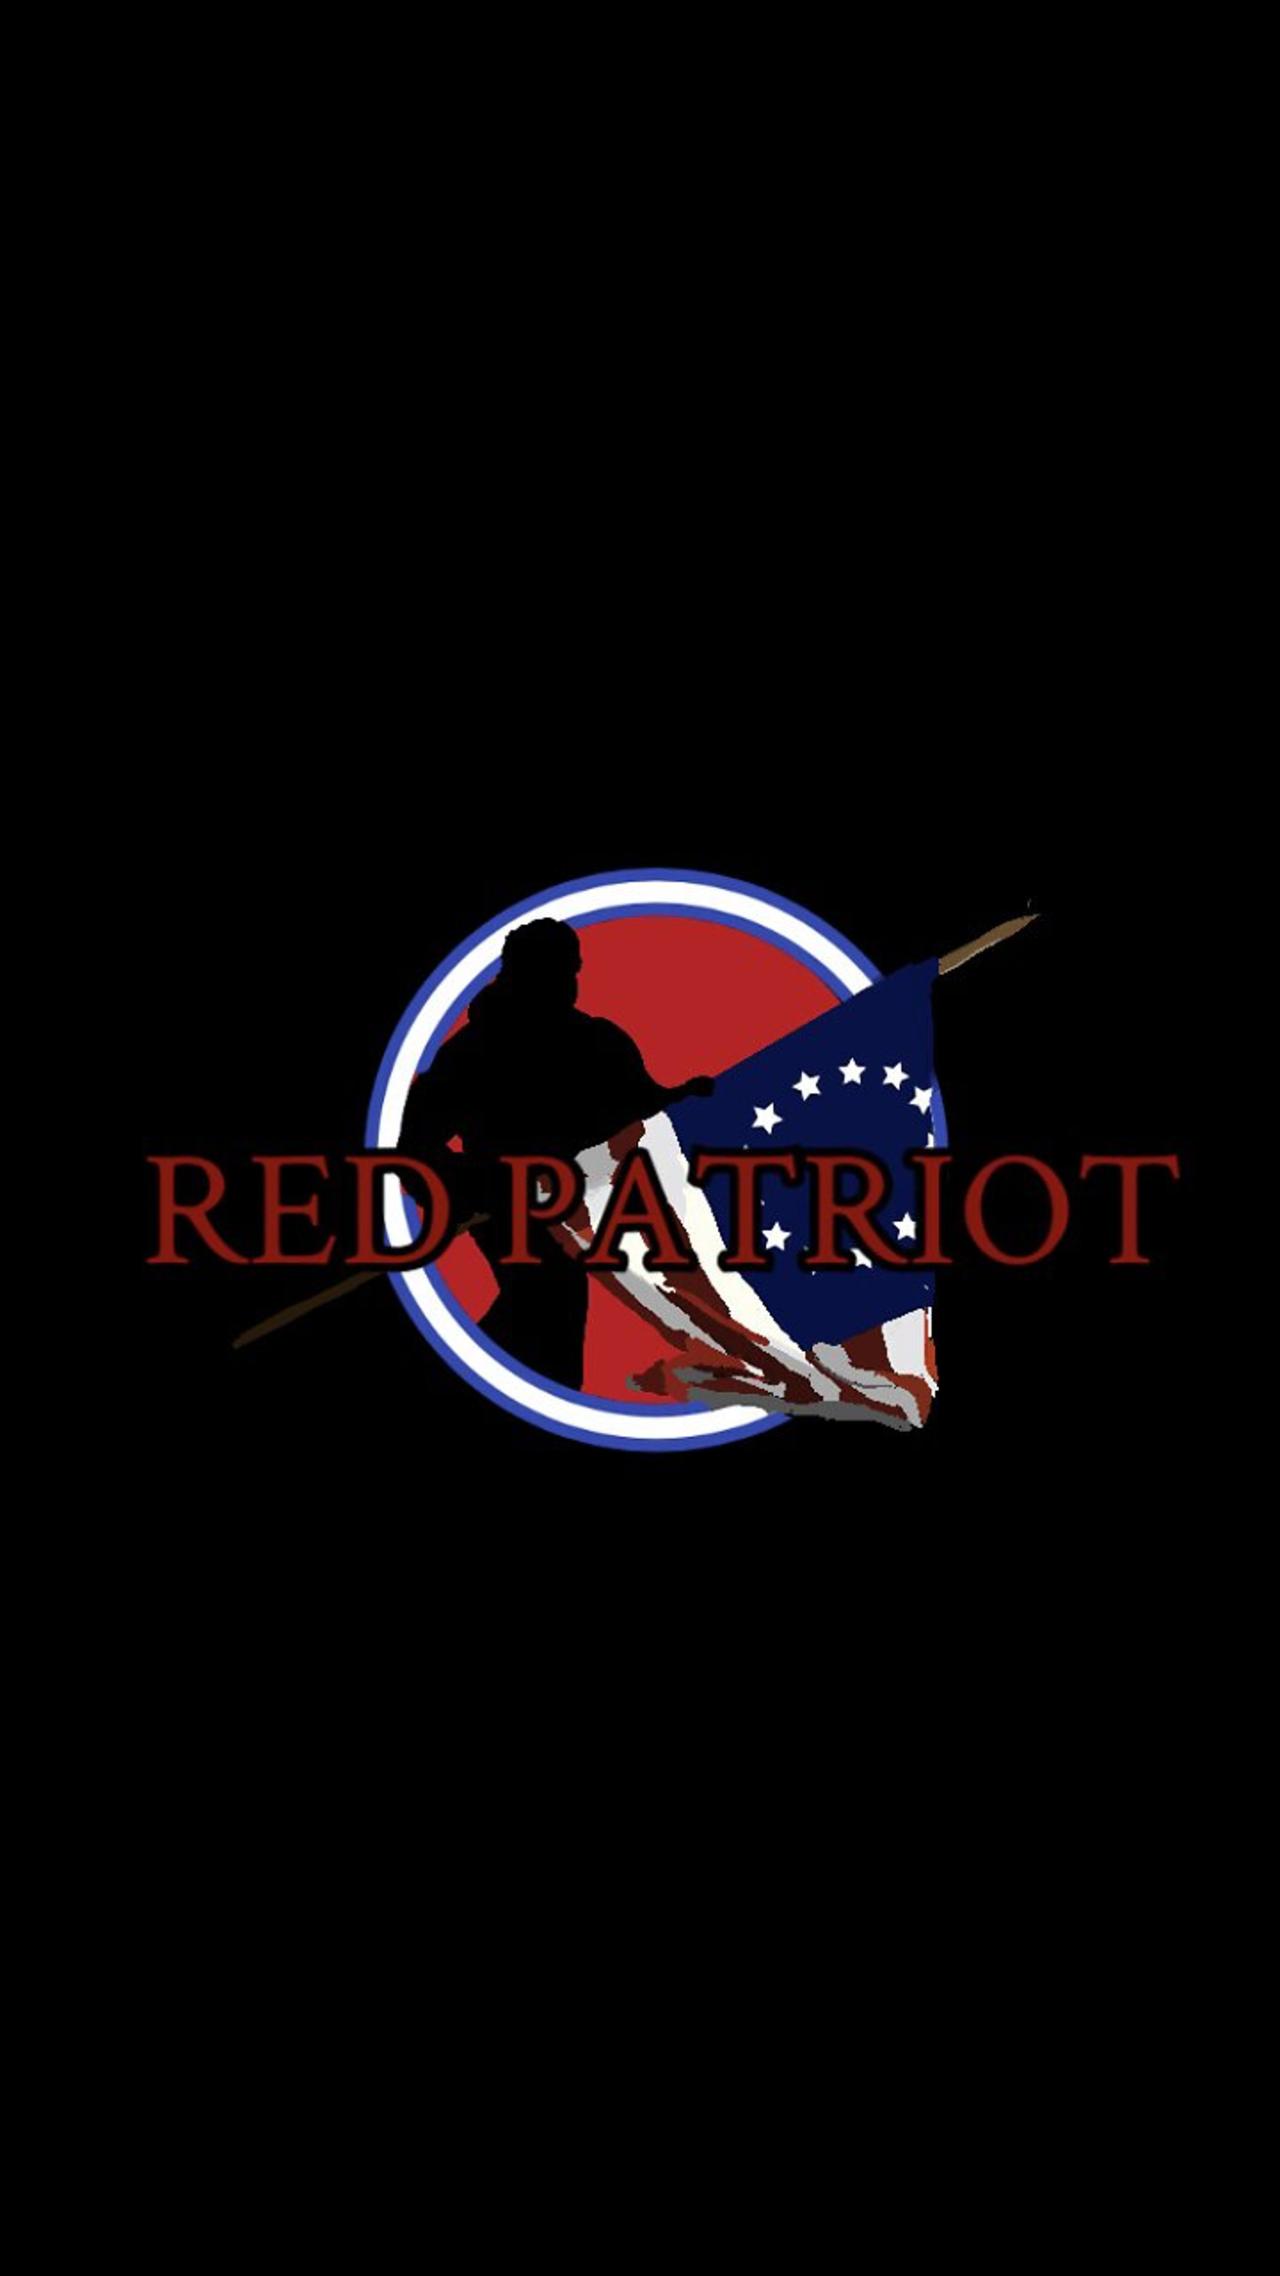 RED PATRIOT Episode 10 don’t believe what your eyes sees